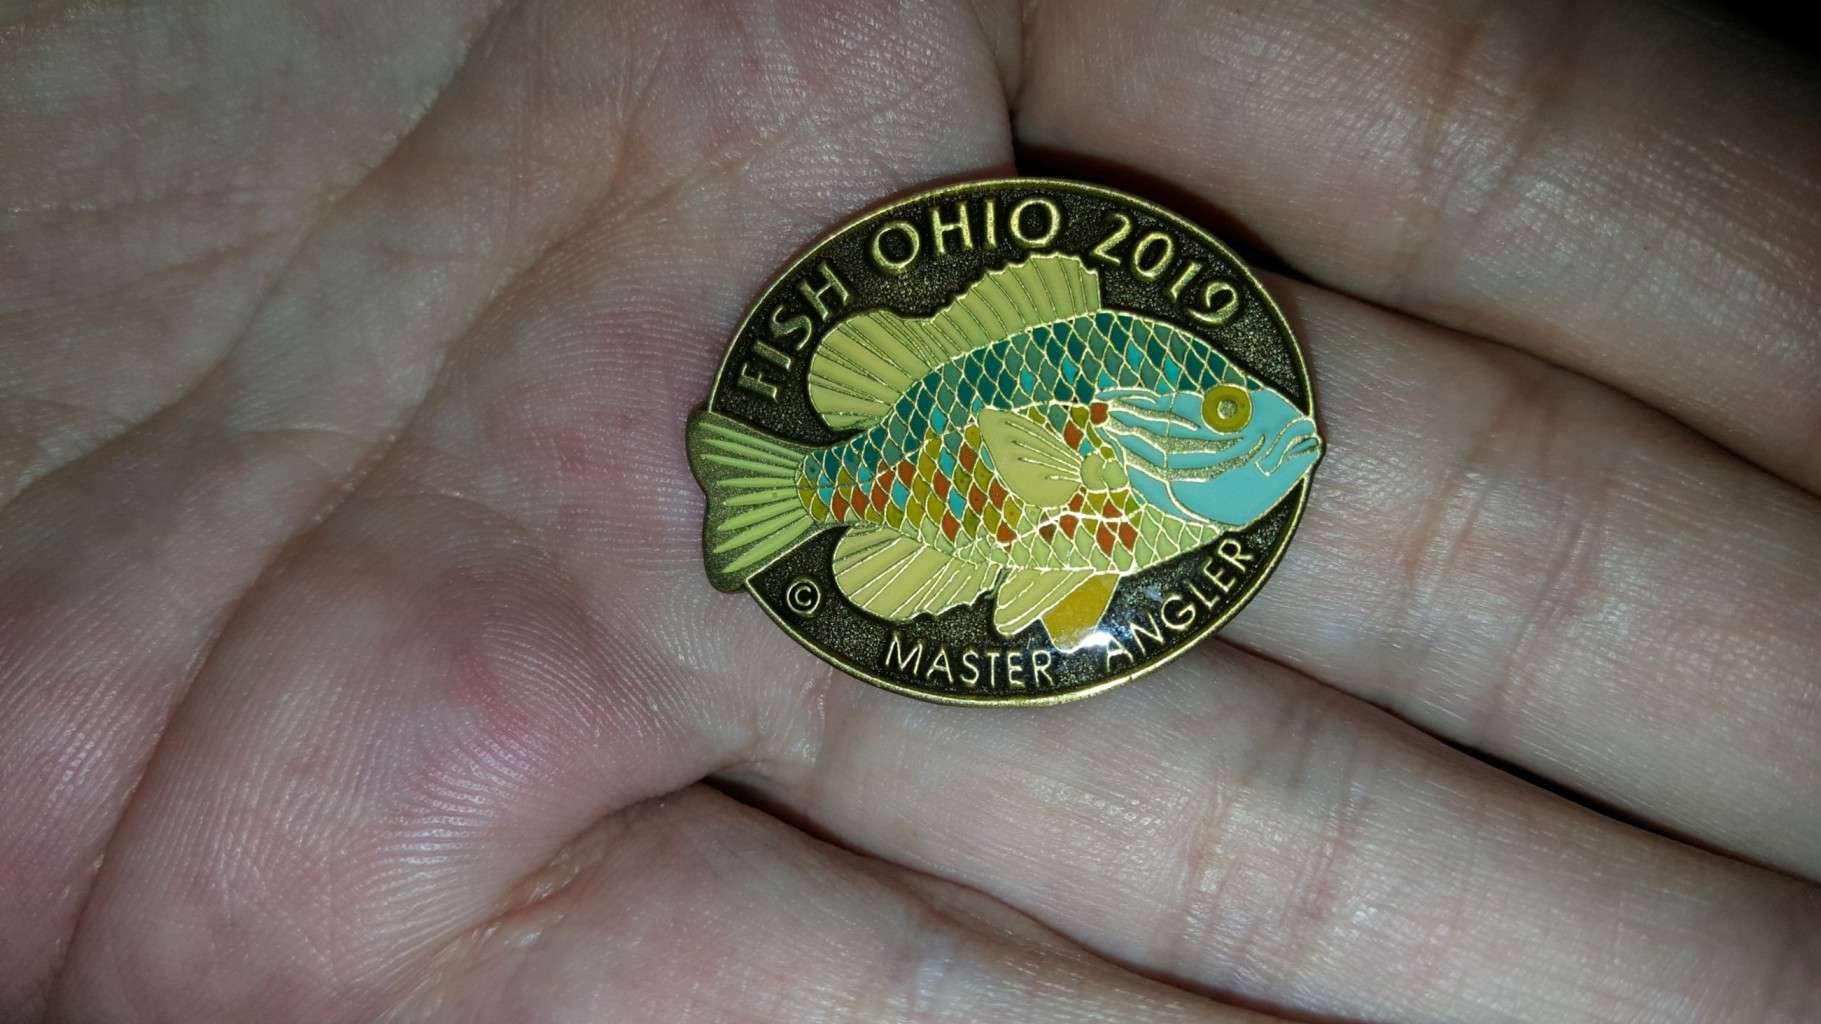 Does your State have a program like the Fish Ohio Recognition